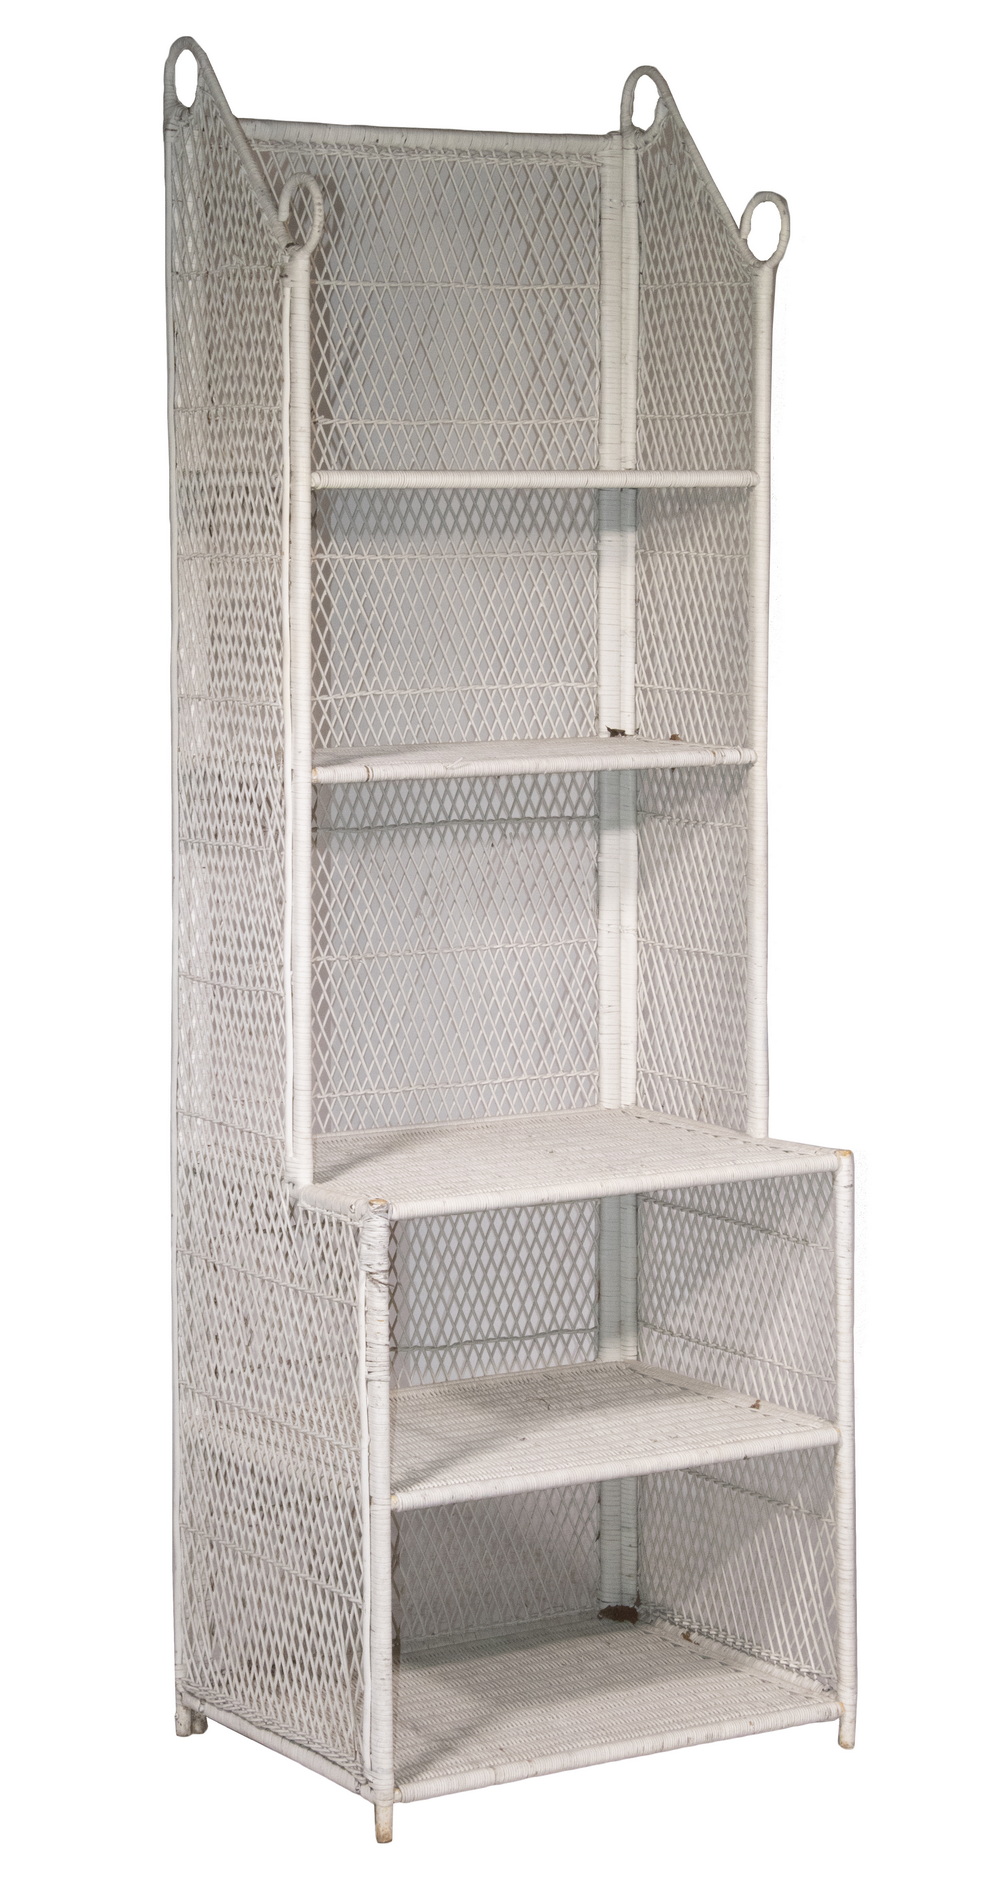 WICKER DISPLAY STAND Vintage White